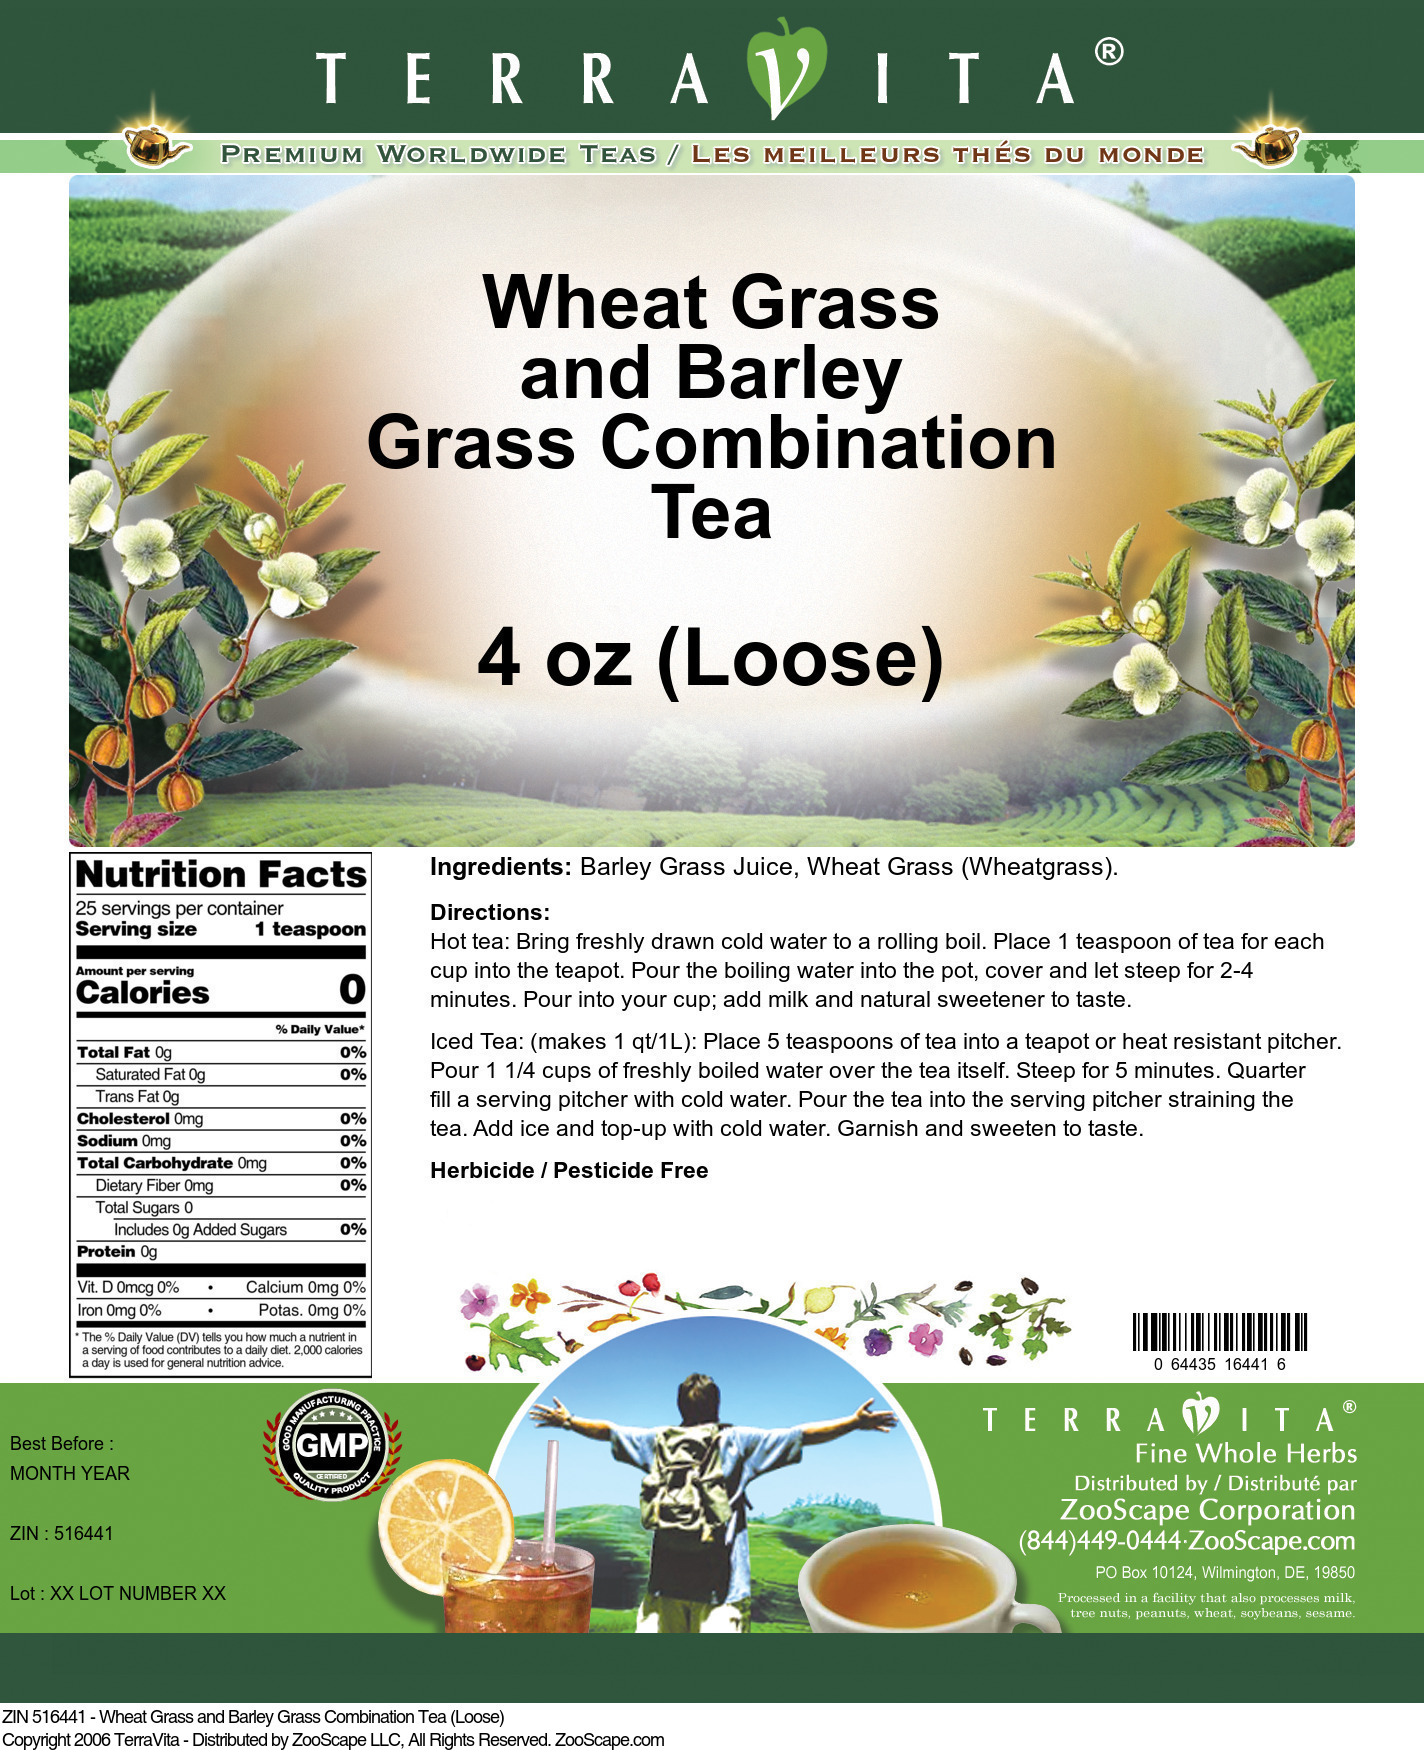 Wheat Grass and Barley Grass Combination Tea (Loose) - Label